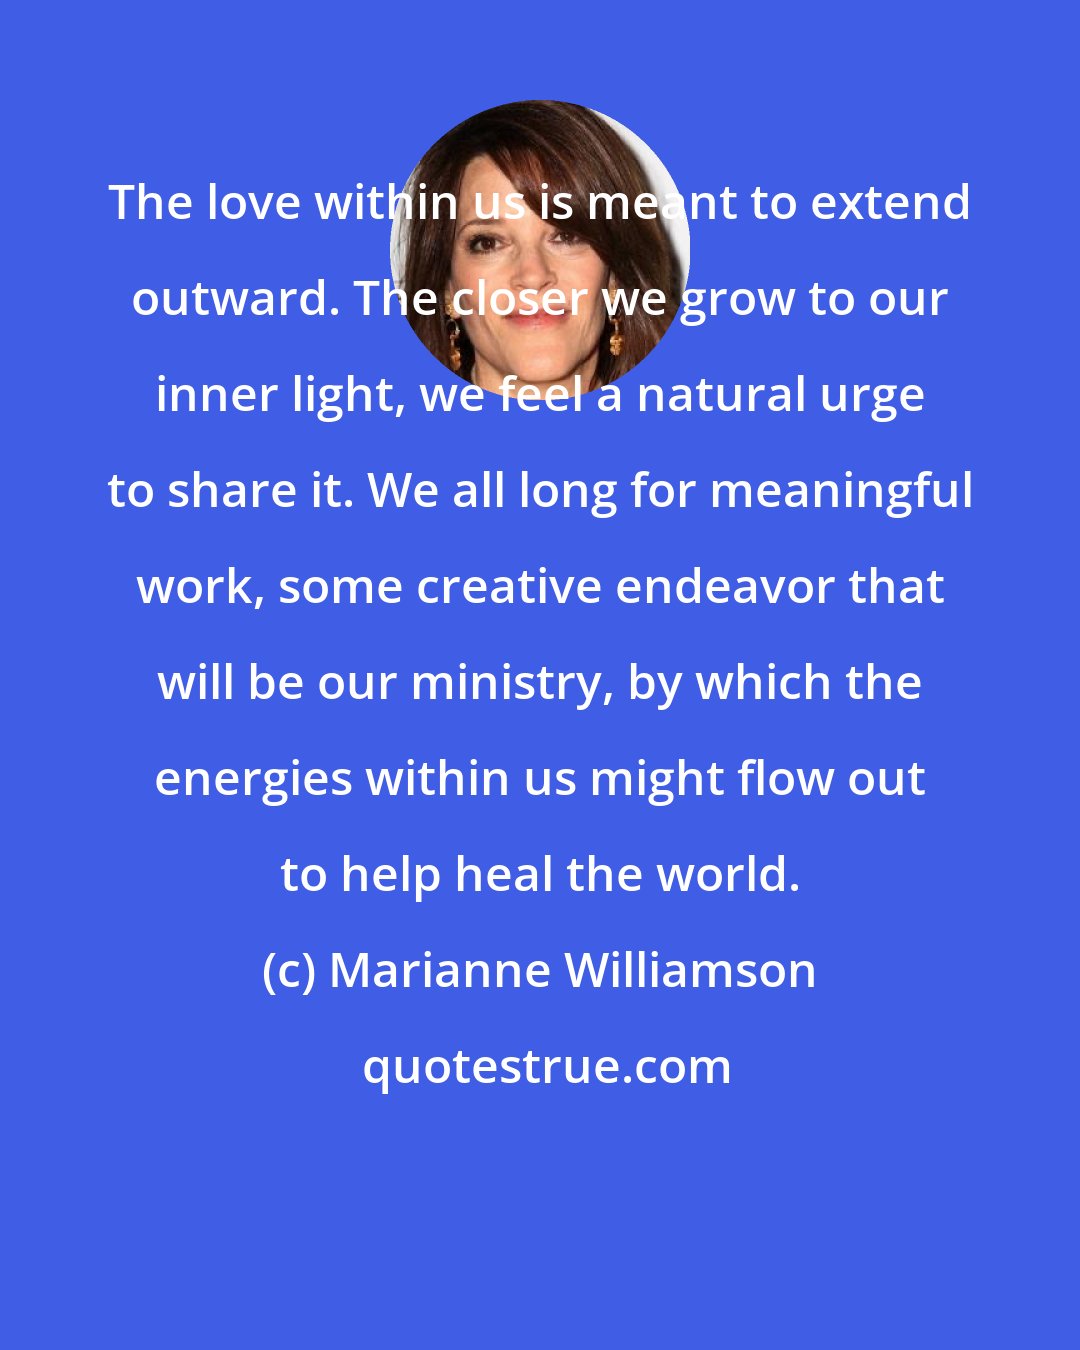 Marianne Williamson: The love within us is meant to extend outward. The closer we grow to our inner light, we feel a natural urge to share it. We all long for meaningful work, some creative endeavor that will be our ministry, by which the energies within us might flow out to help heal the world.